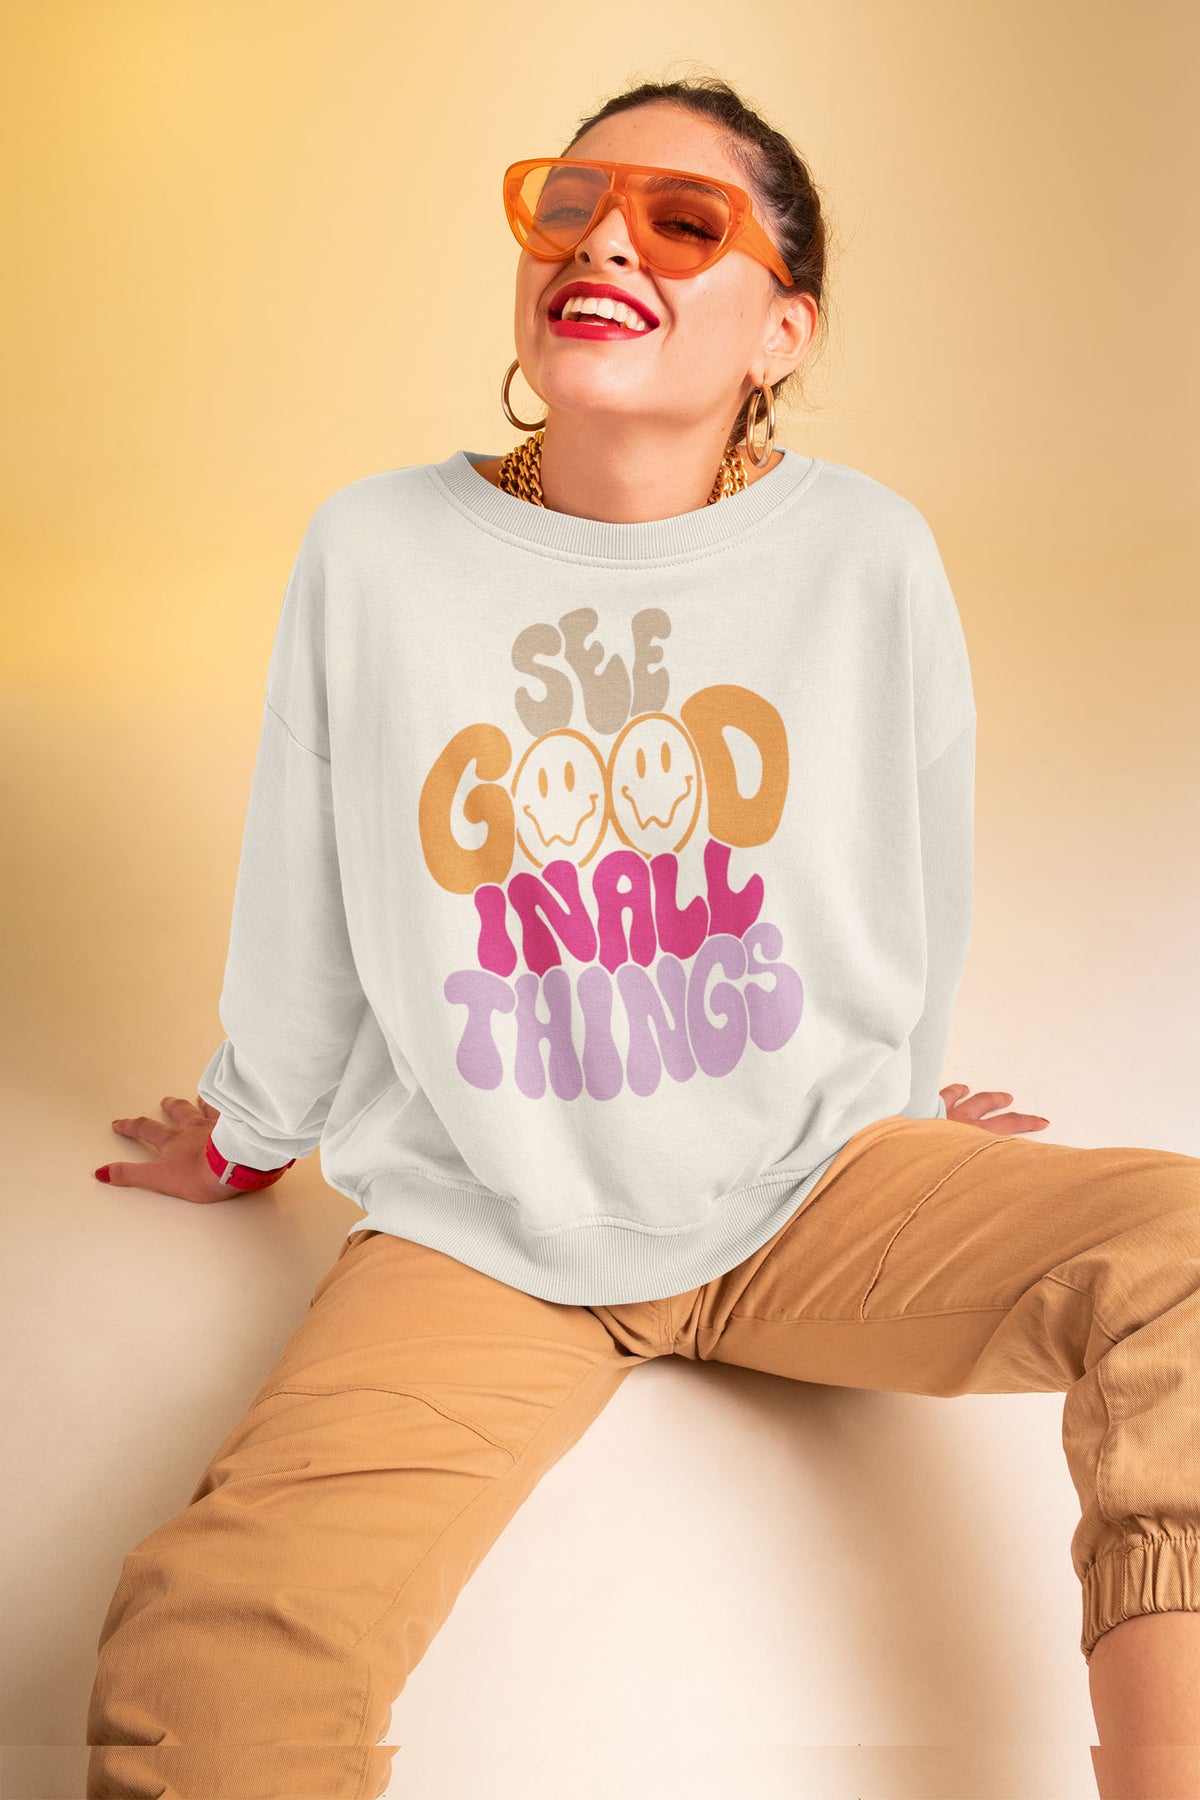 See Good in All Things relaxed Fit Sweatshirt For Women